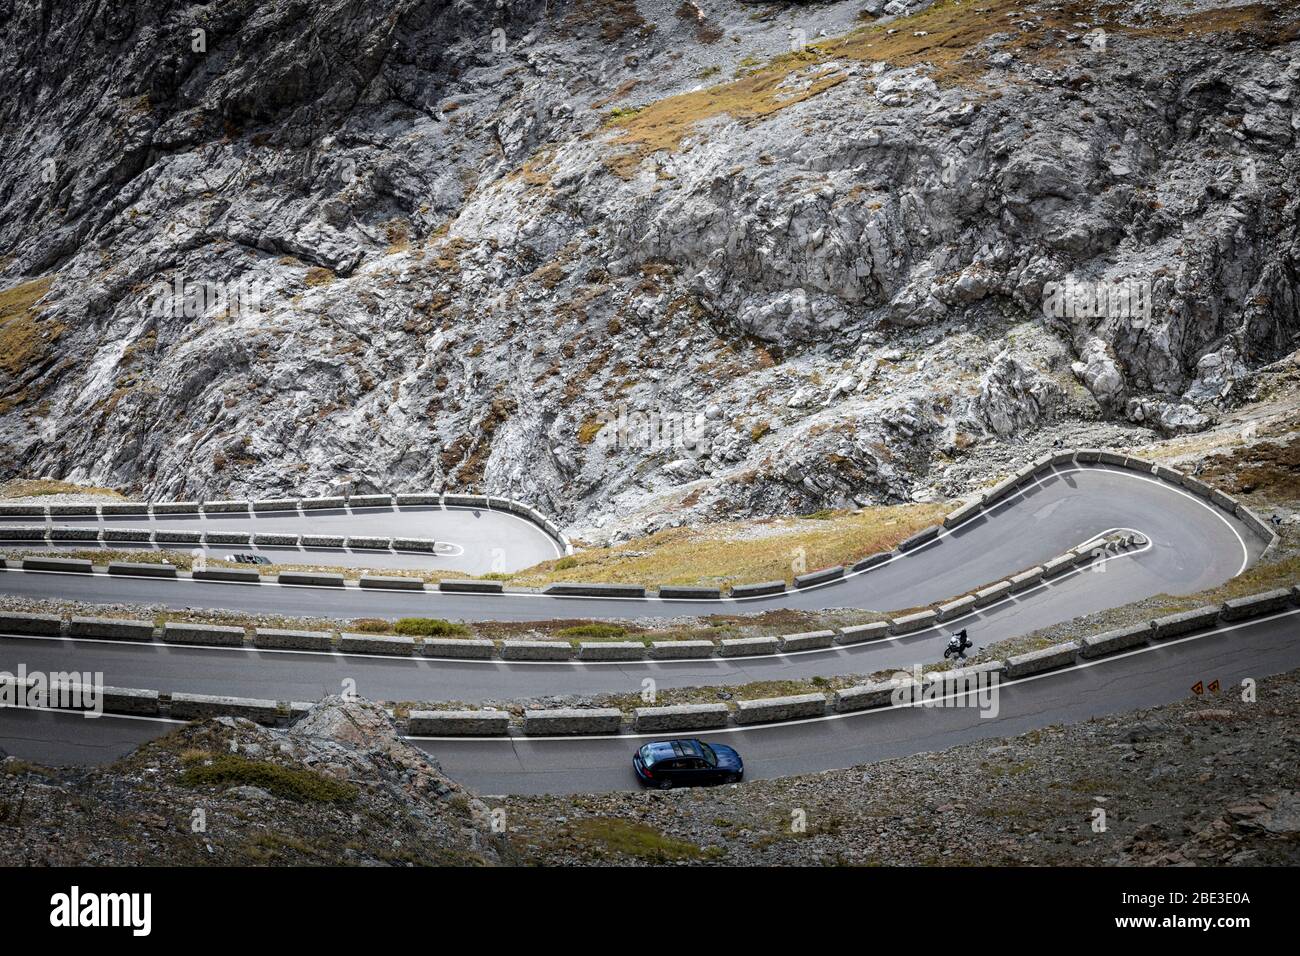 The approach to the Passo dello Stelvio (Stelvio Pass) showing its many hairpin bends, Italy. Stock Photo